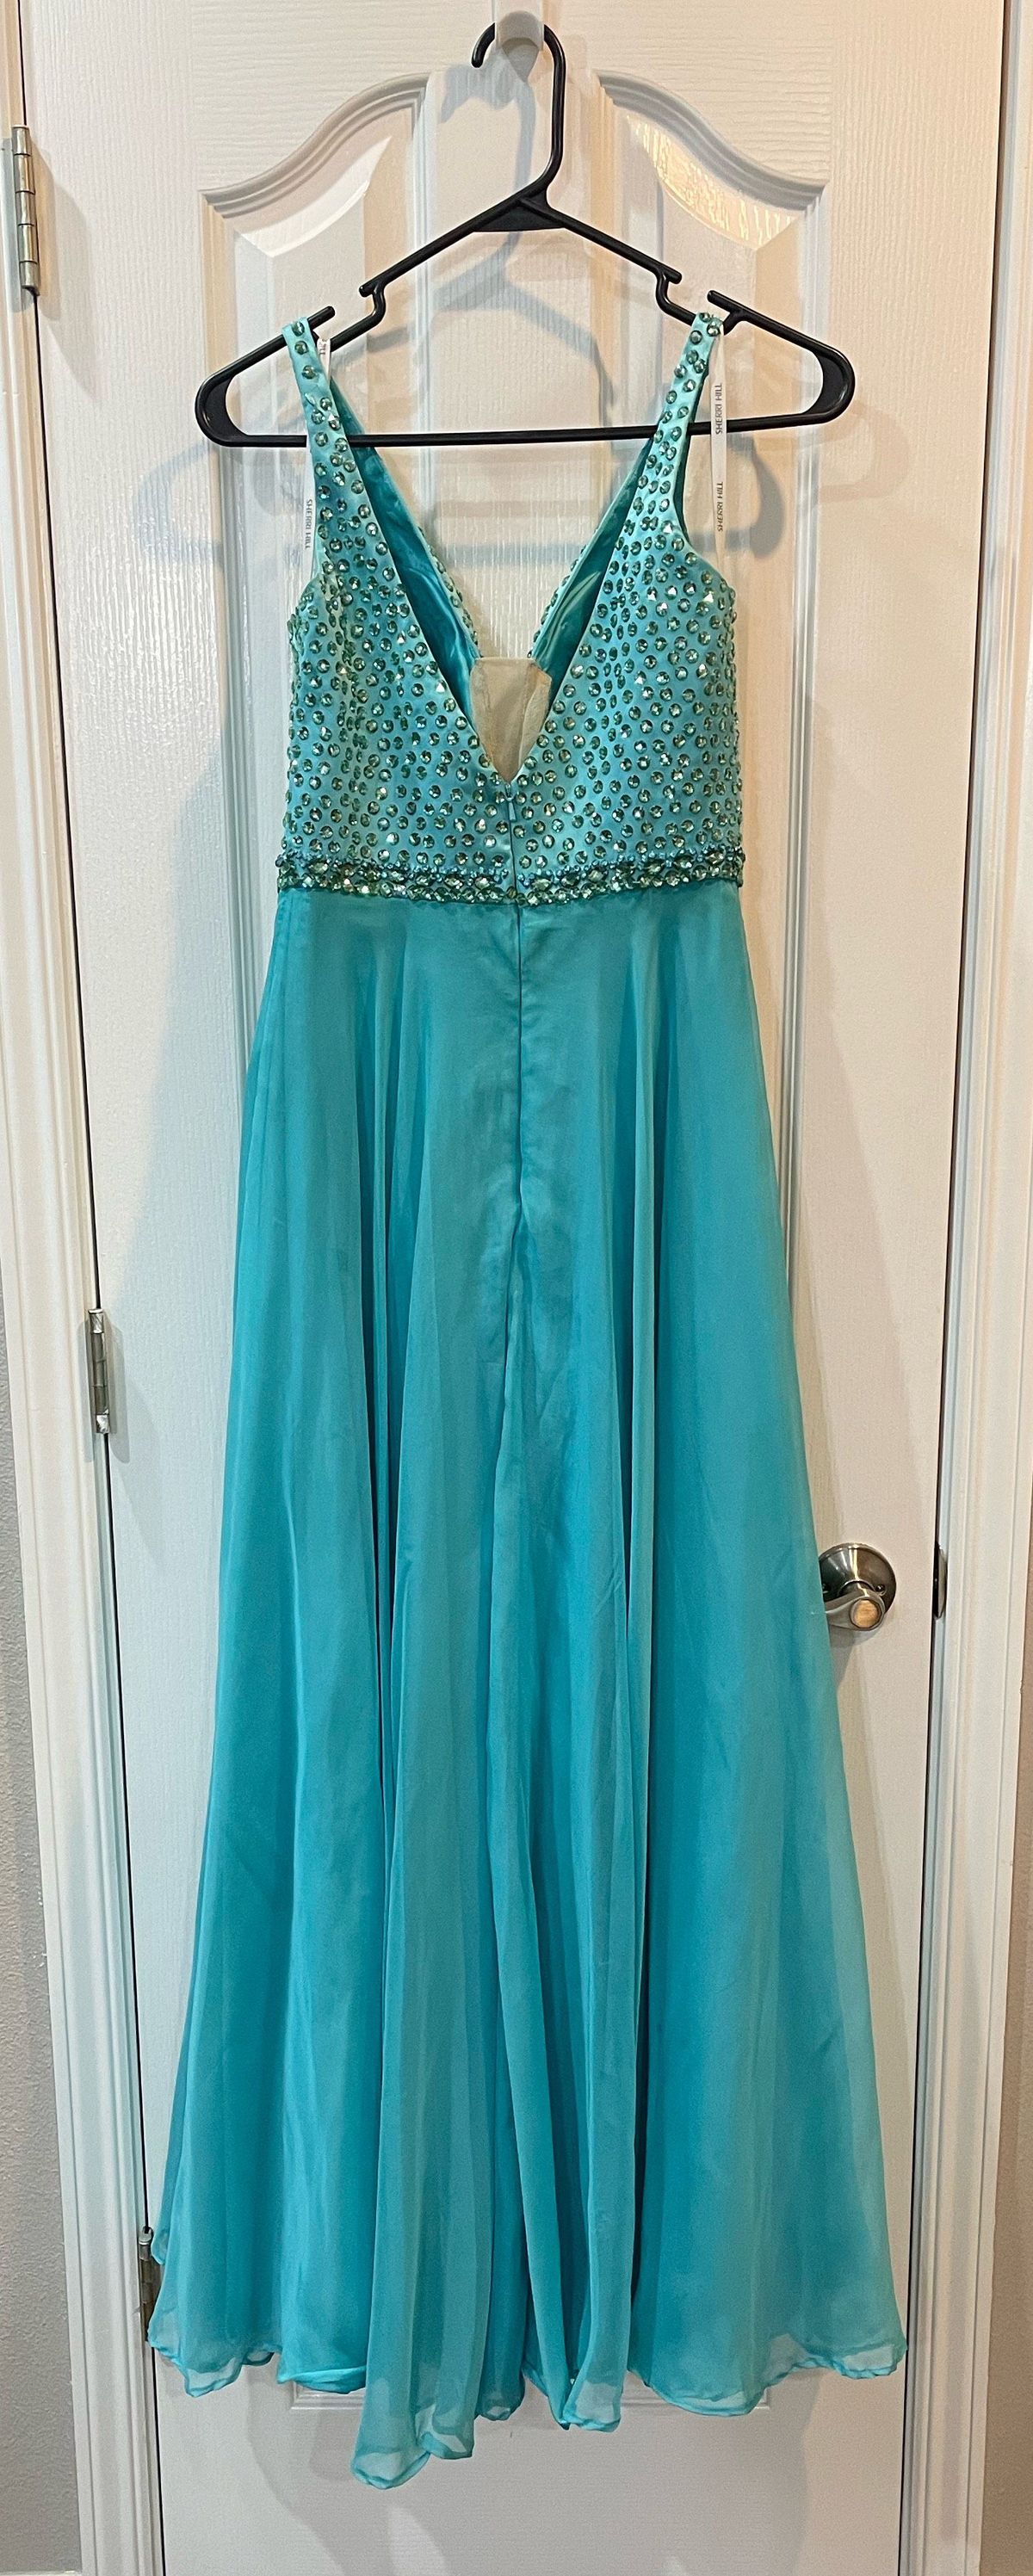 Sherri Hill Size 4 Bridesmaid Plunge Sequined Light Blue A-line Dress on Queenly